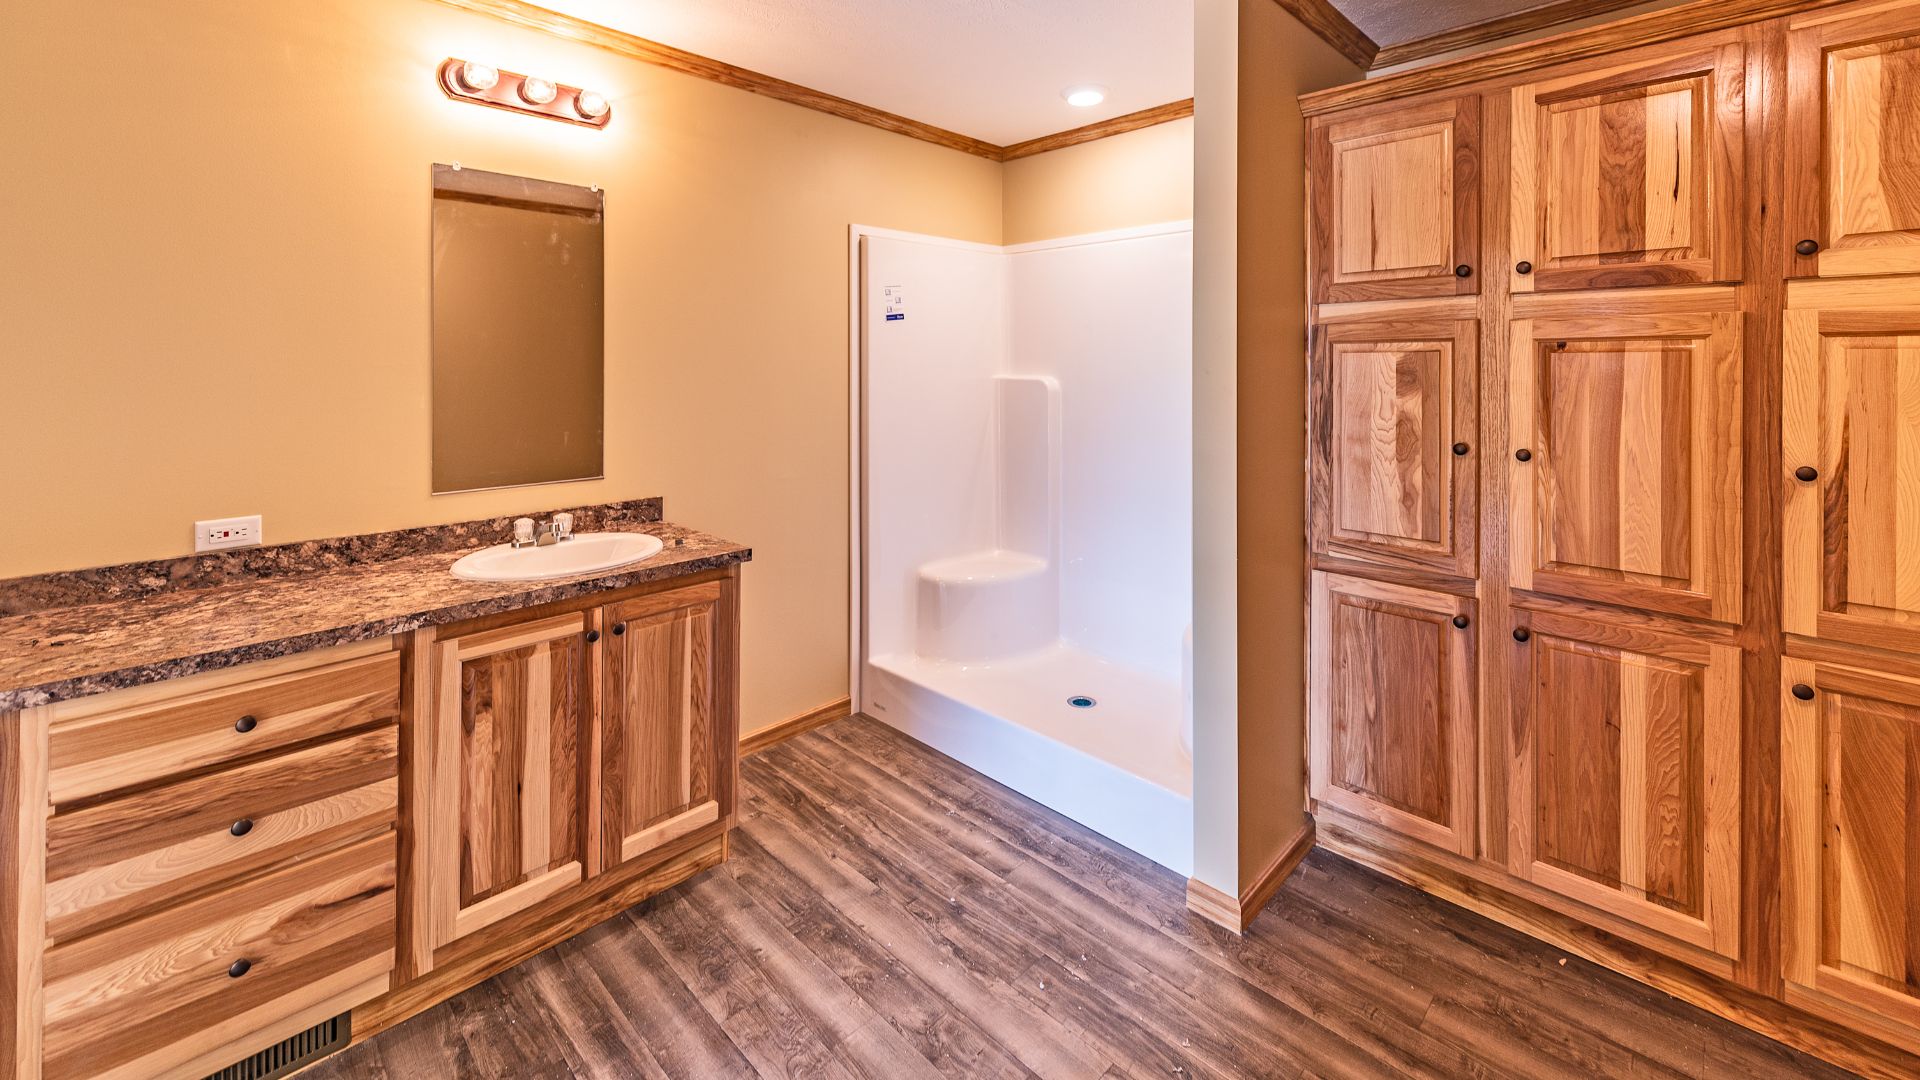 Rustic bathroom style with wood bathroom cabinets and walk in shower